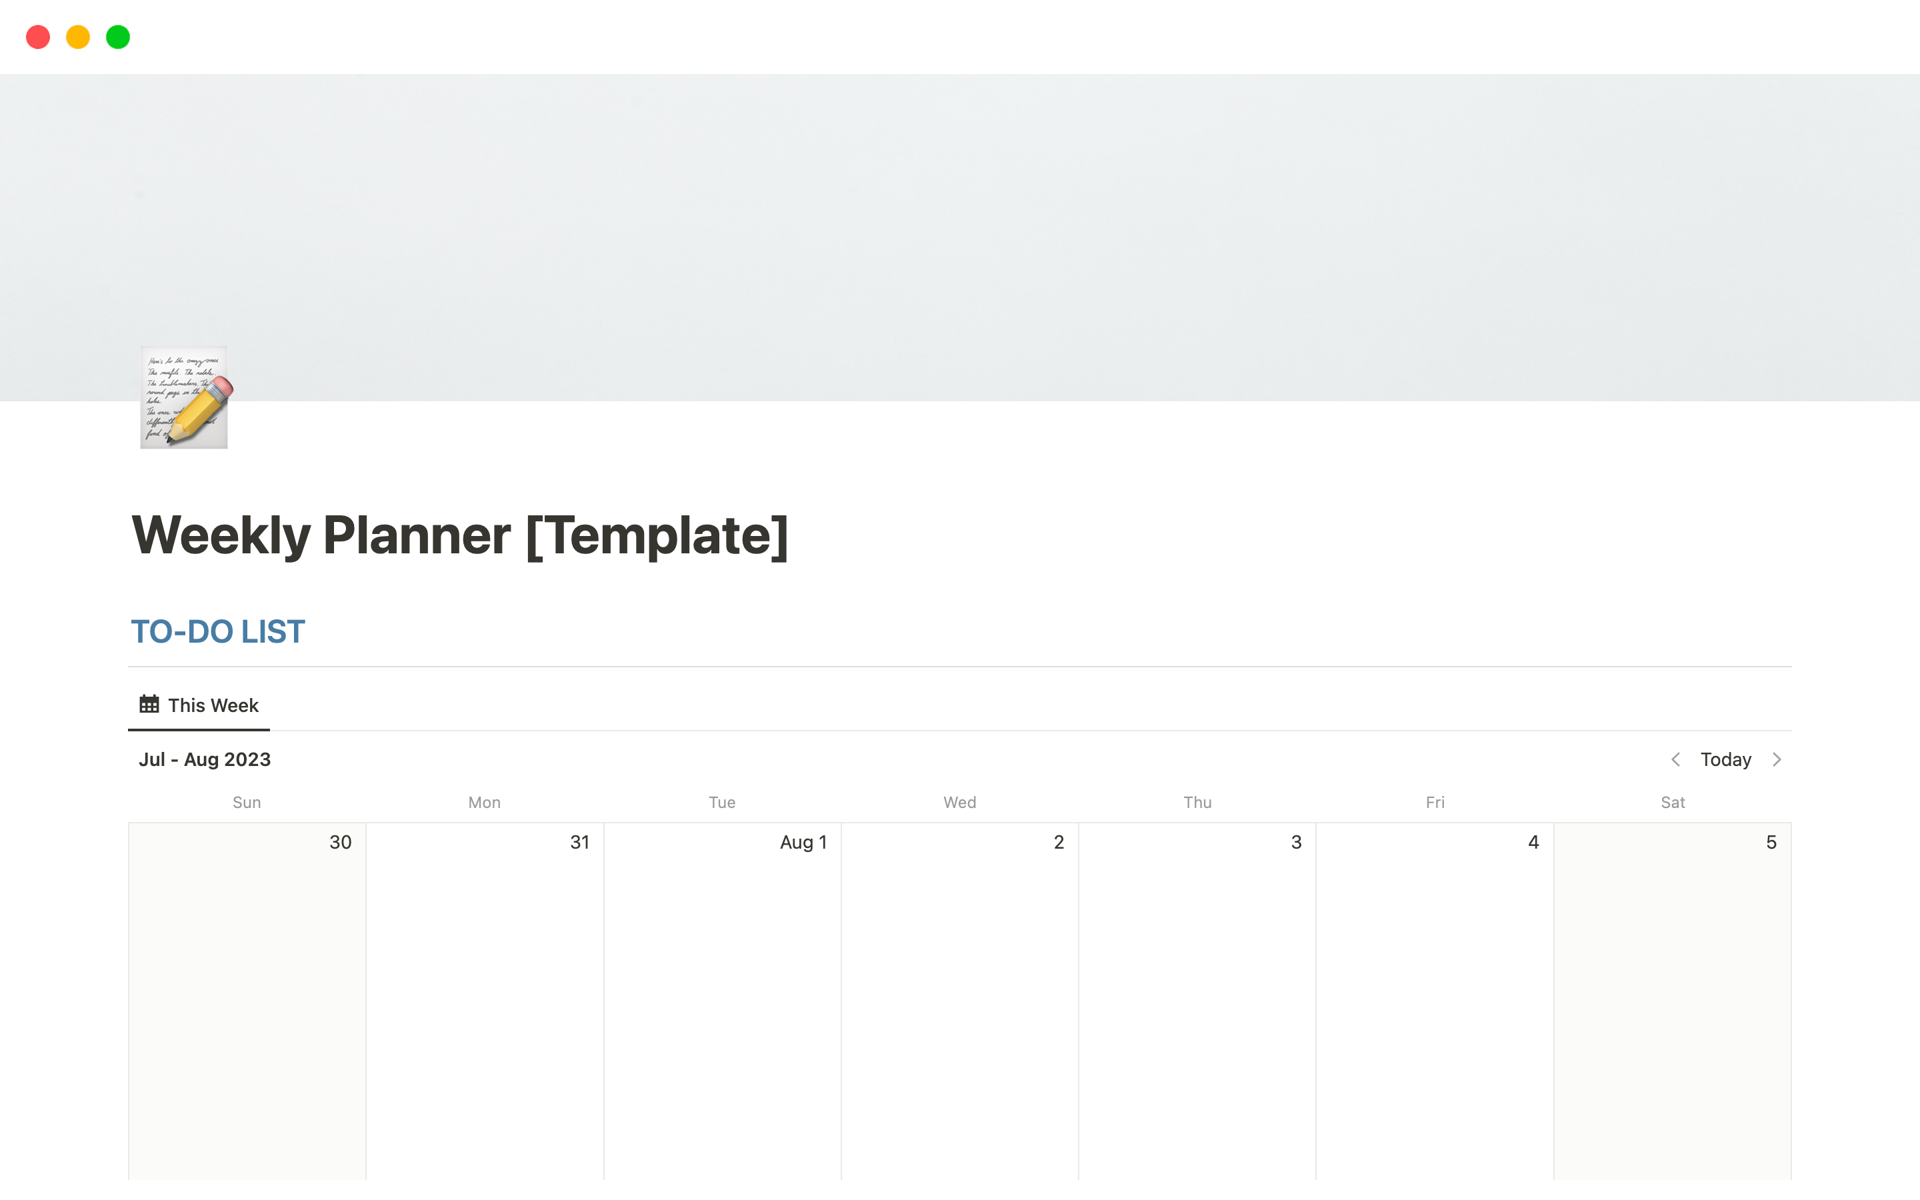 This weekly planner template helps you plan your week and stay on top of your tasks and schedule.